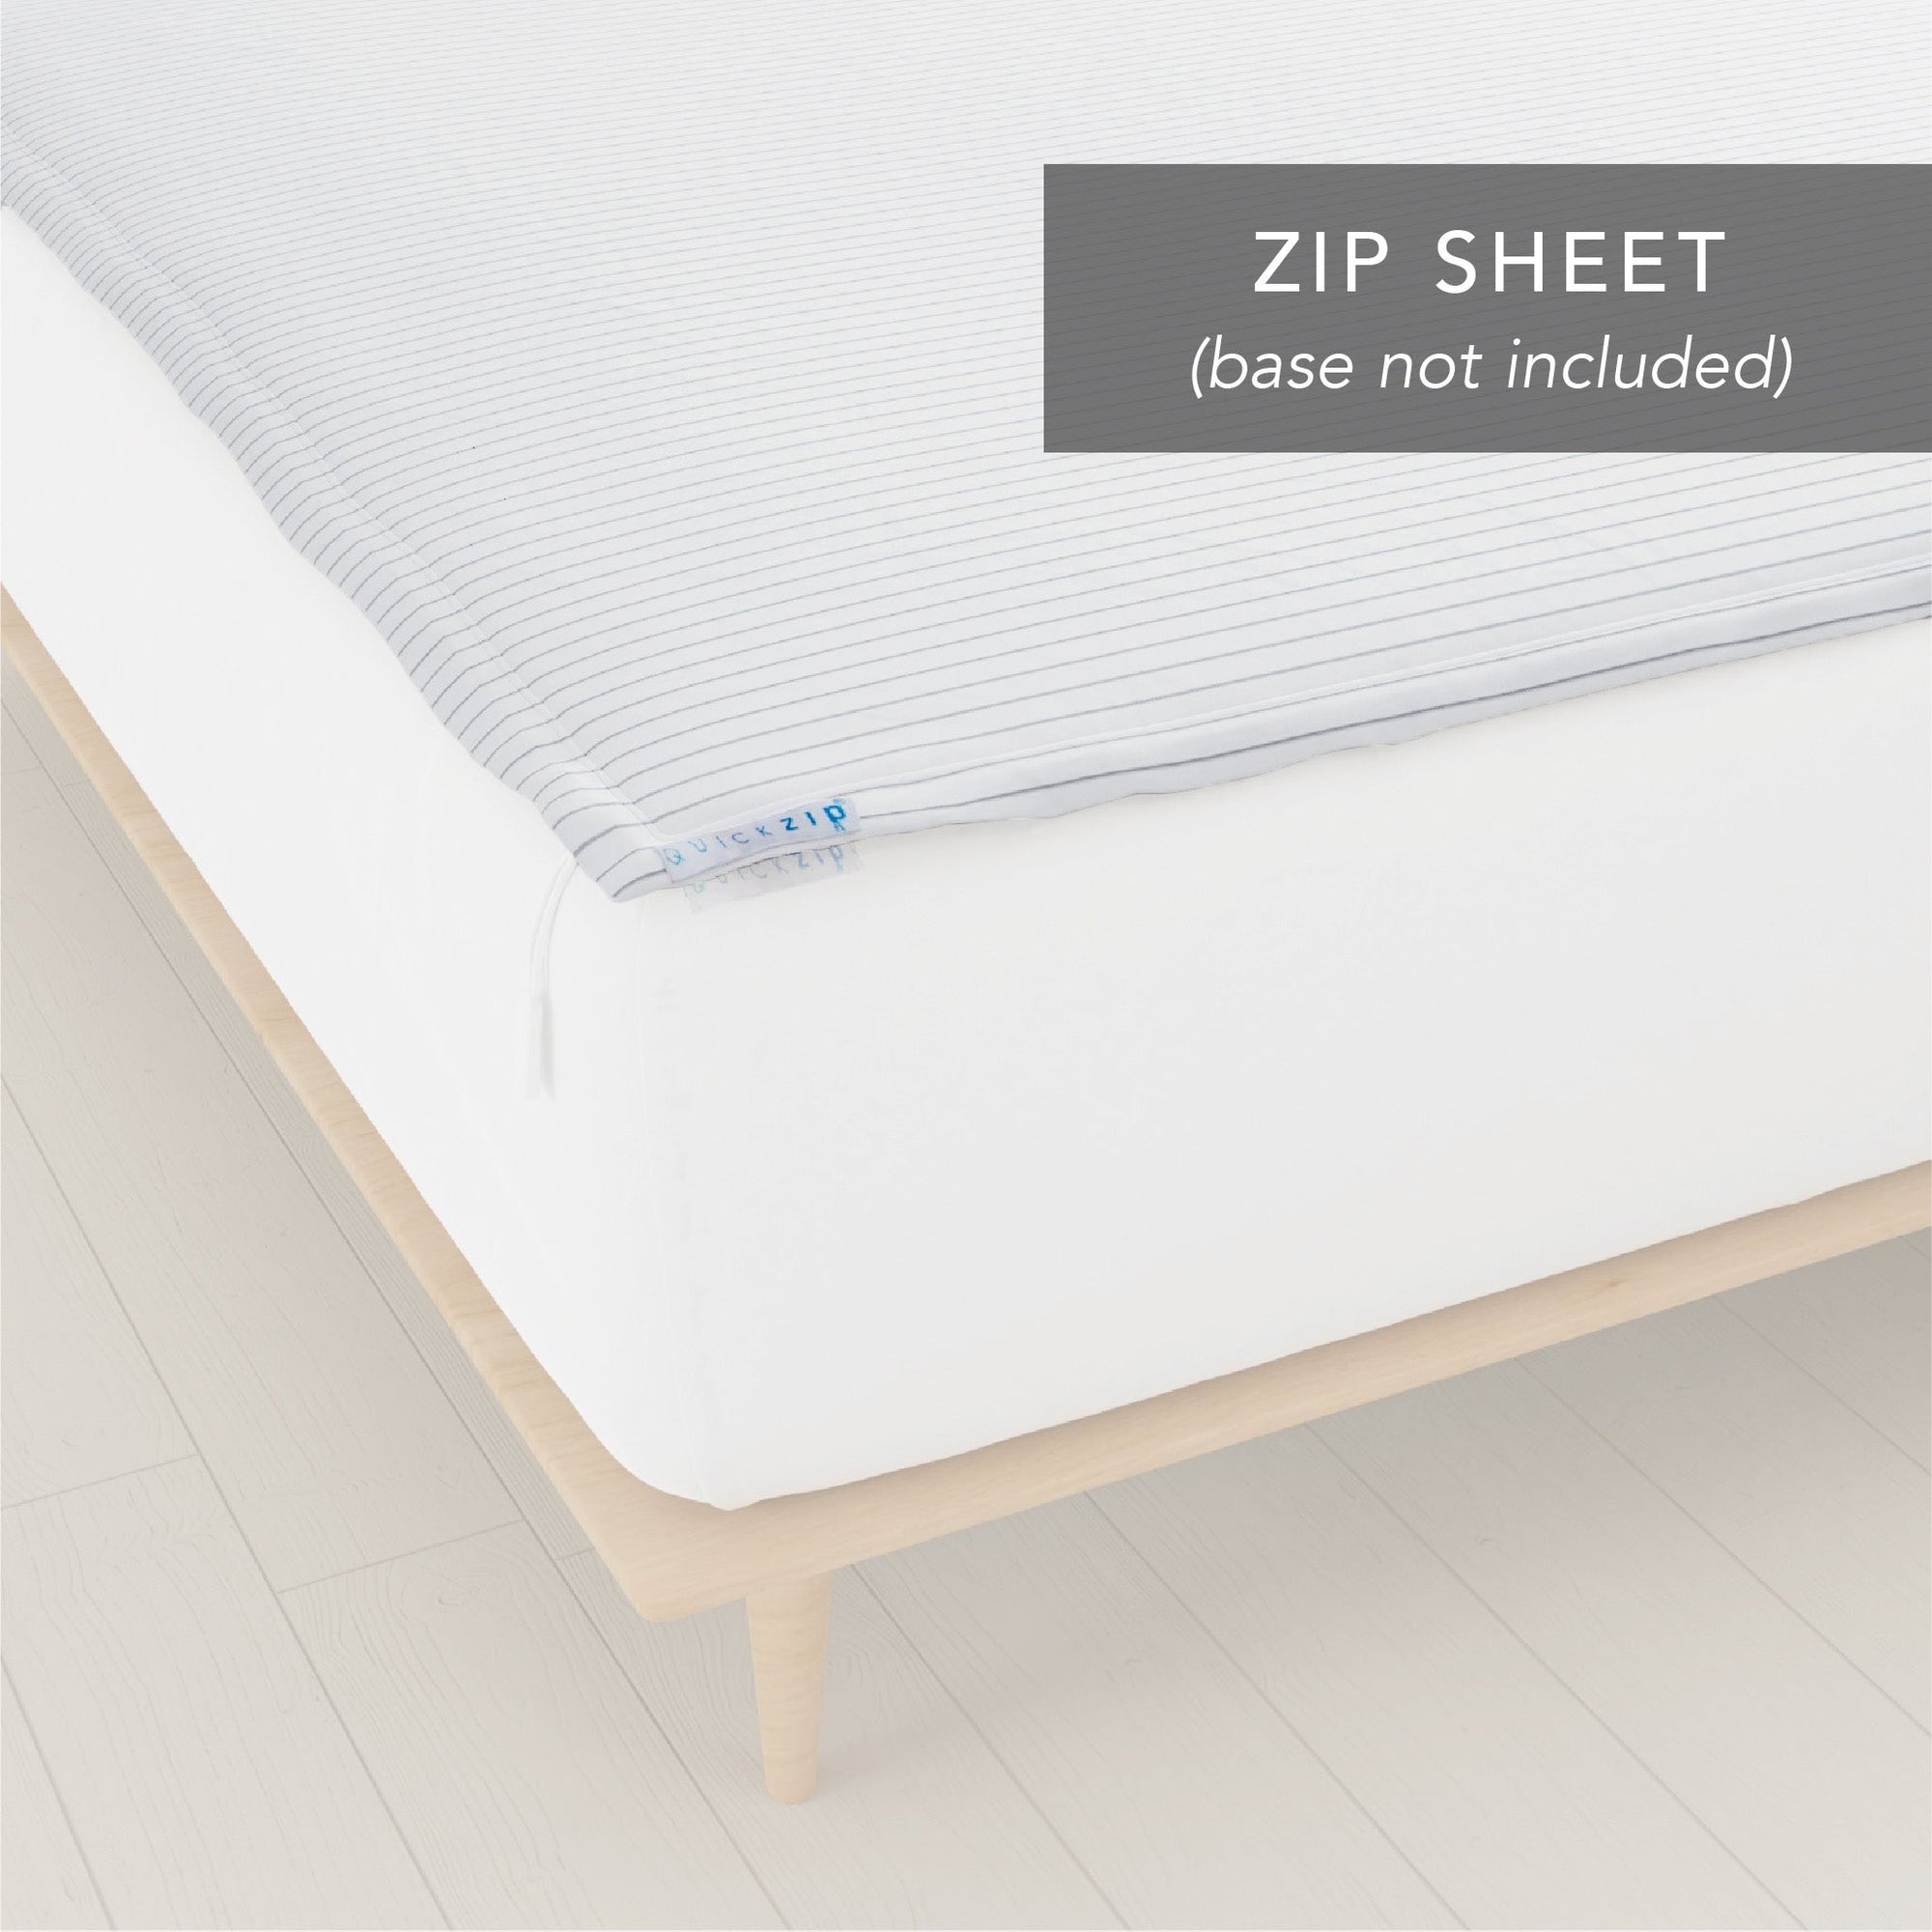 Add-On Zip Sheets